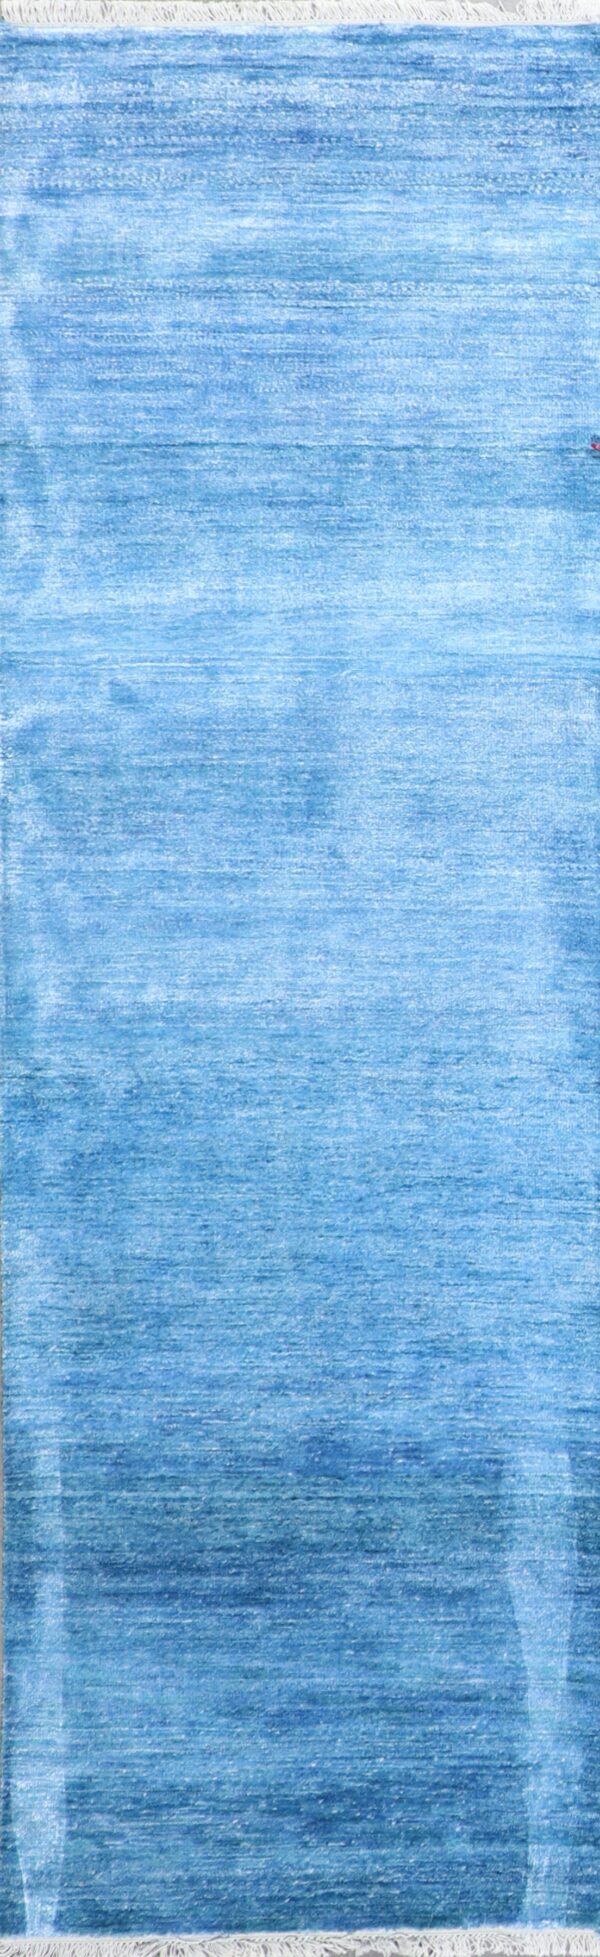 2’10”x9’10” Contemporary Blue Wool Hand-Knotted Rug - Direct Rug Import | Rugs in Chicago, Indiana,South Bend,Granger